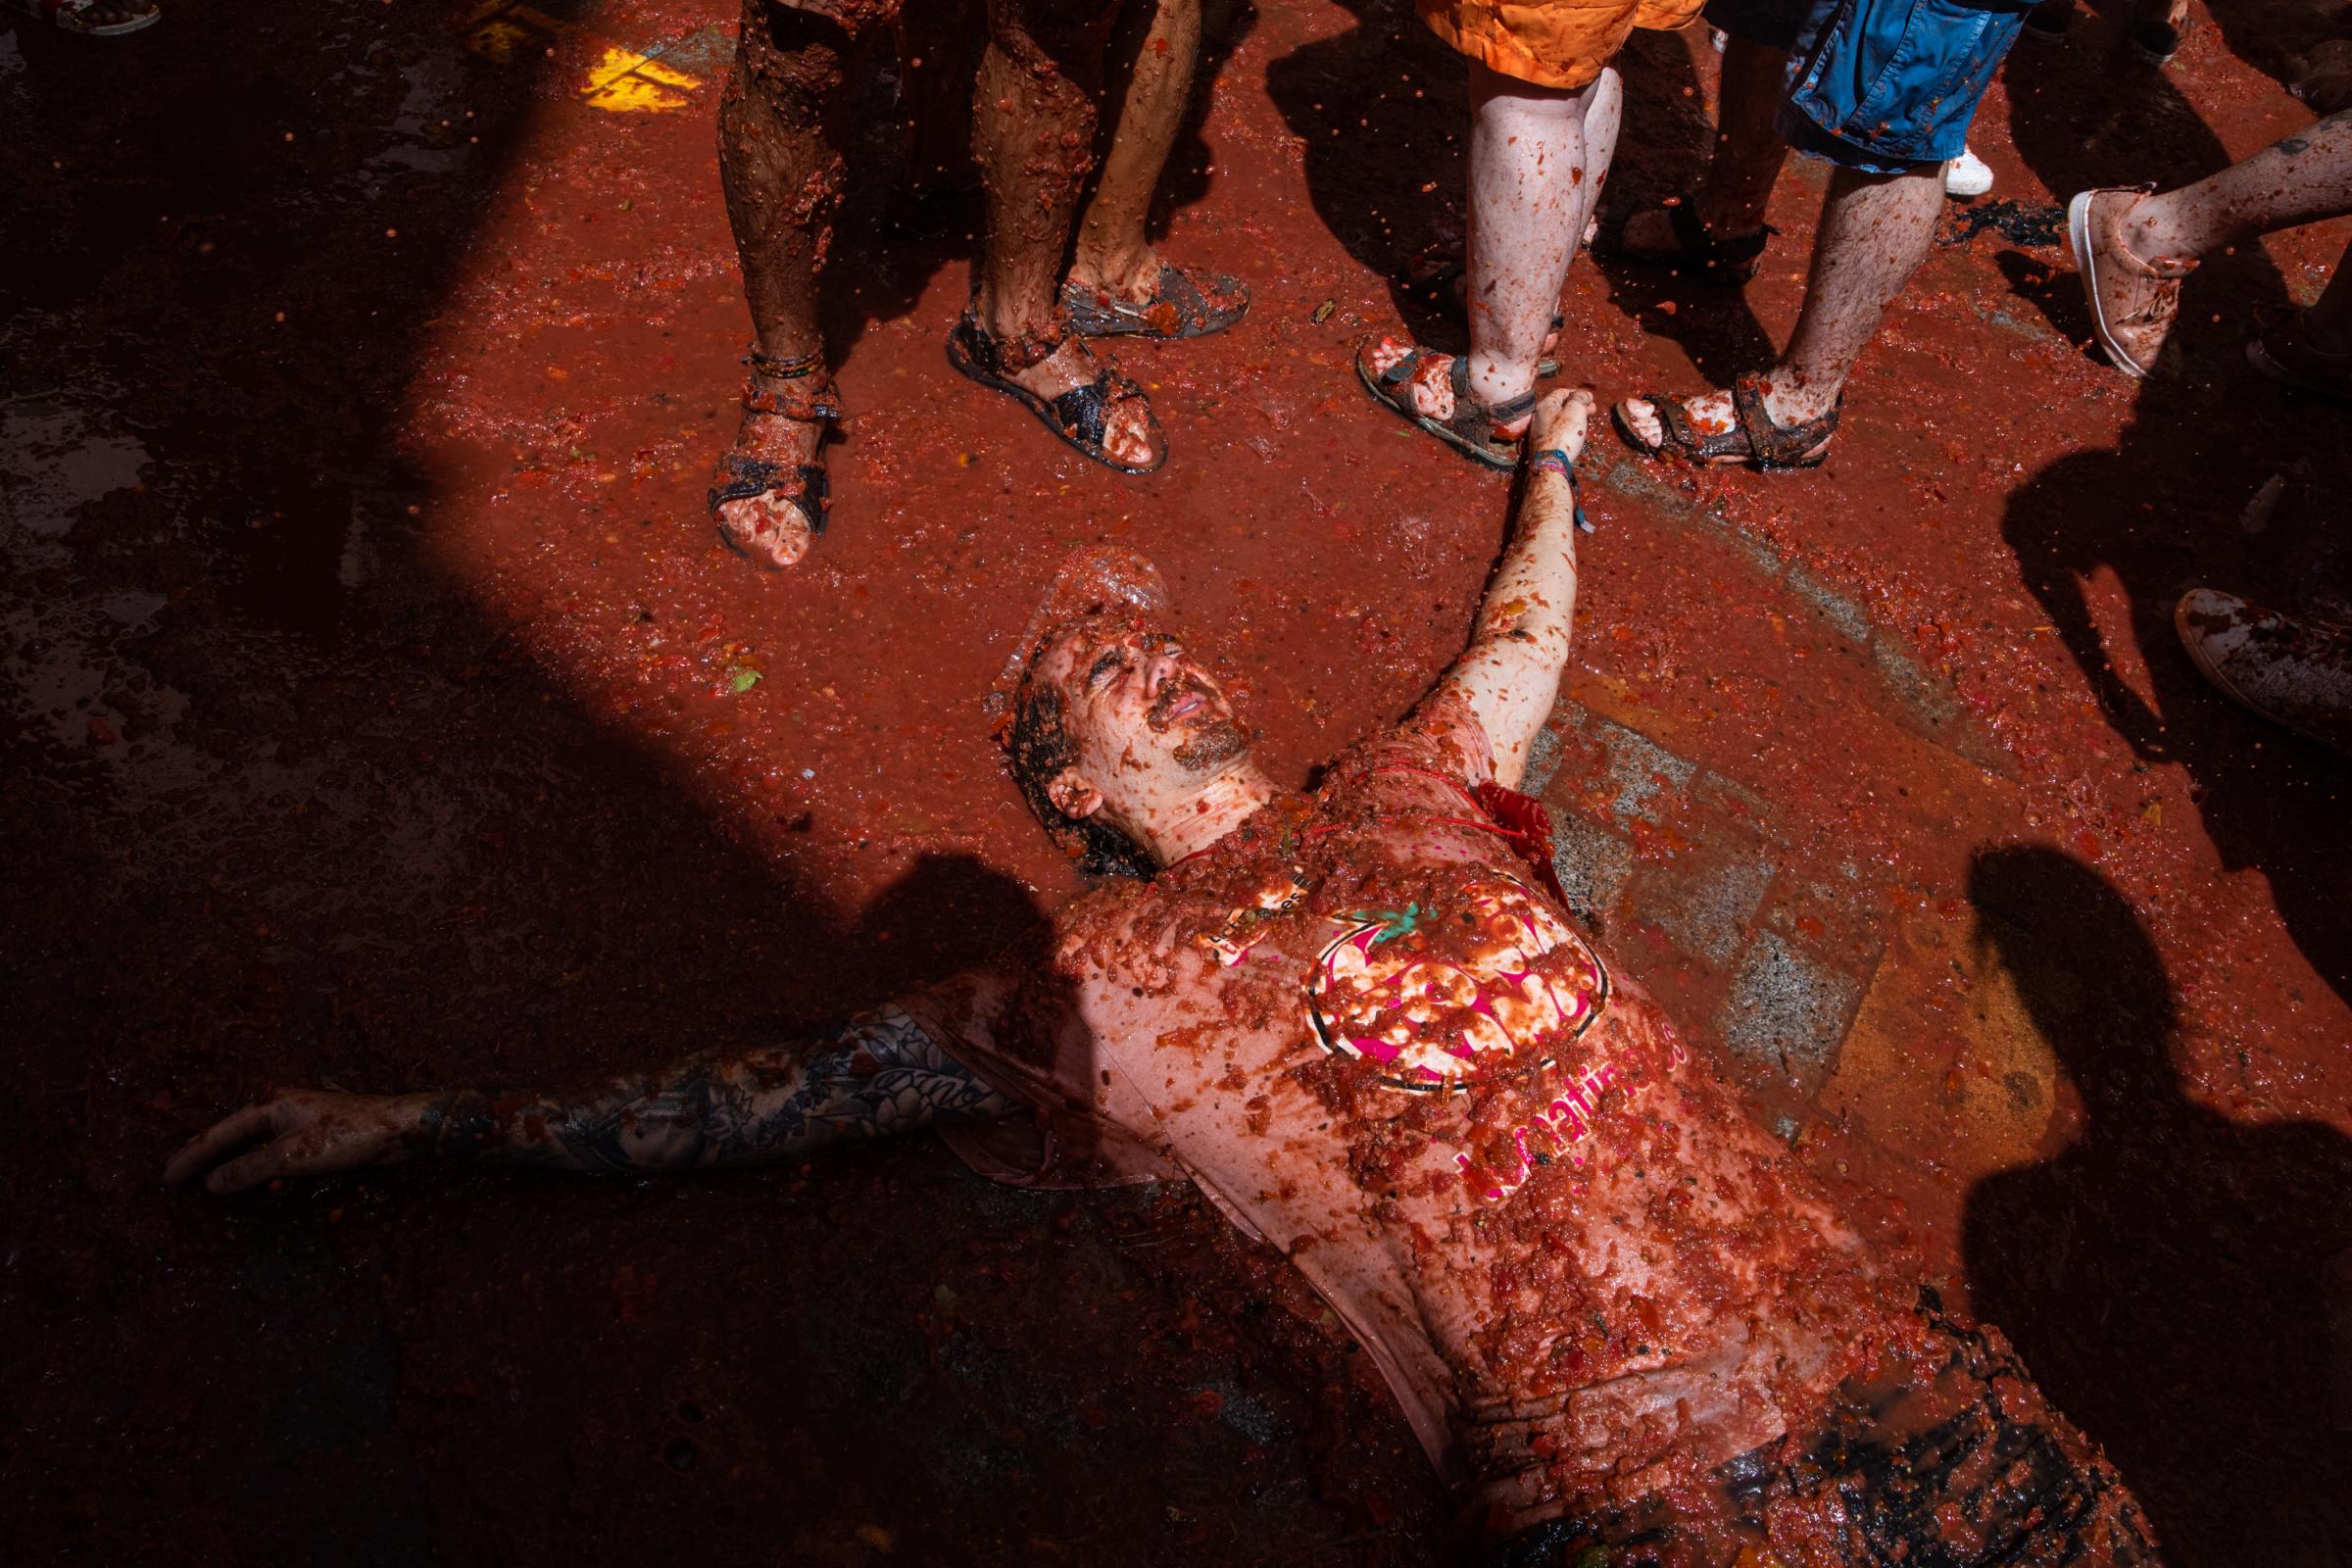 Spain's Tomato Throwing Festival Returns After Covid Hiatus For The 75th Edition - BUNOL, SPAIN - AUGUST 31: A reveler enjoys the Tomatina...